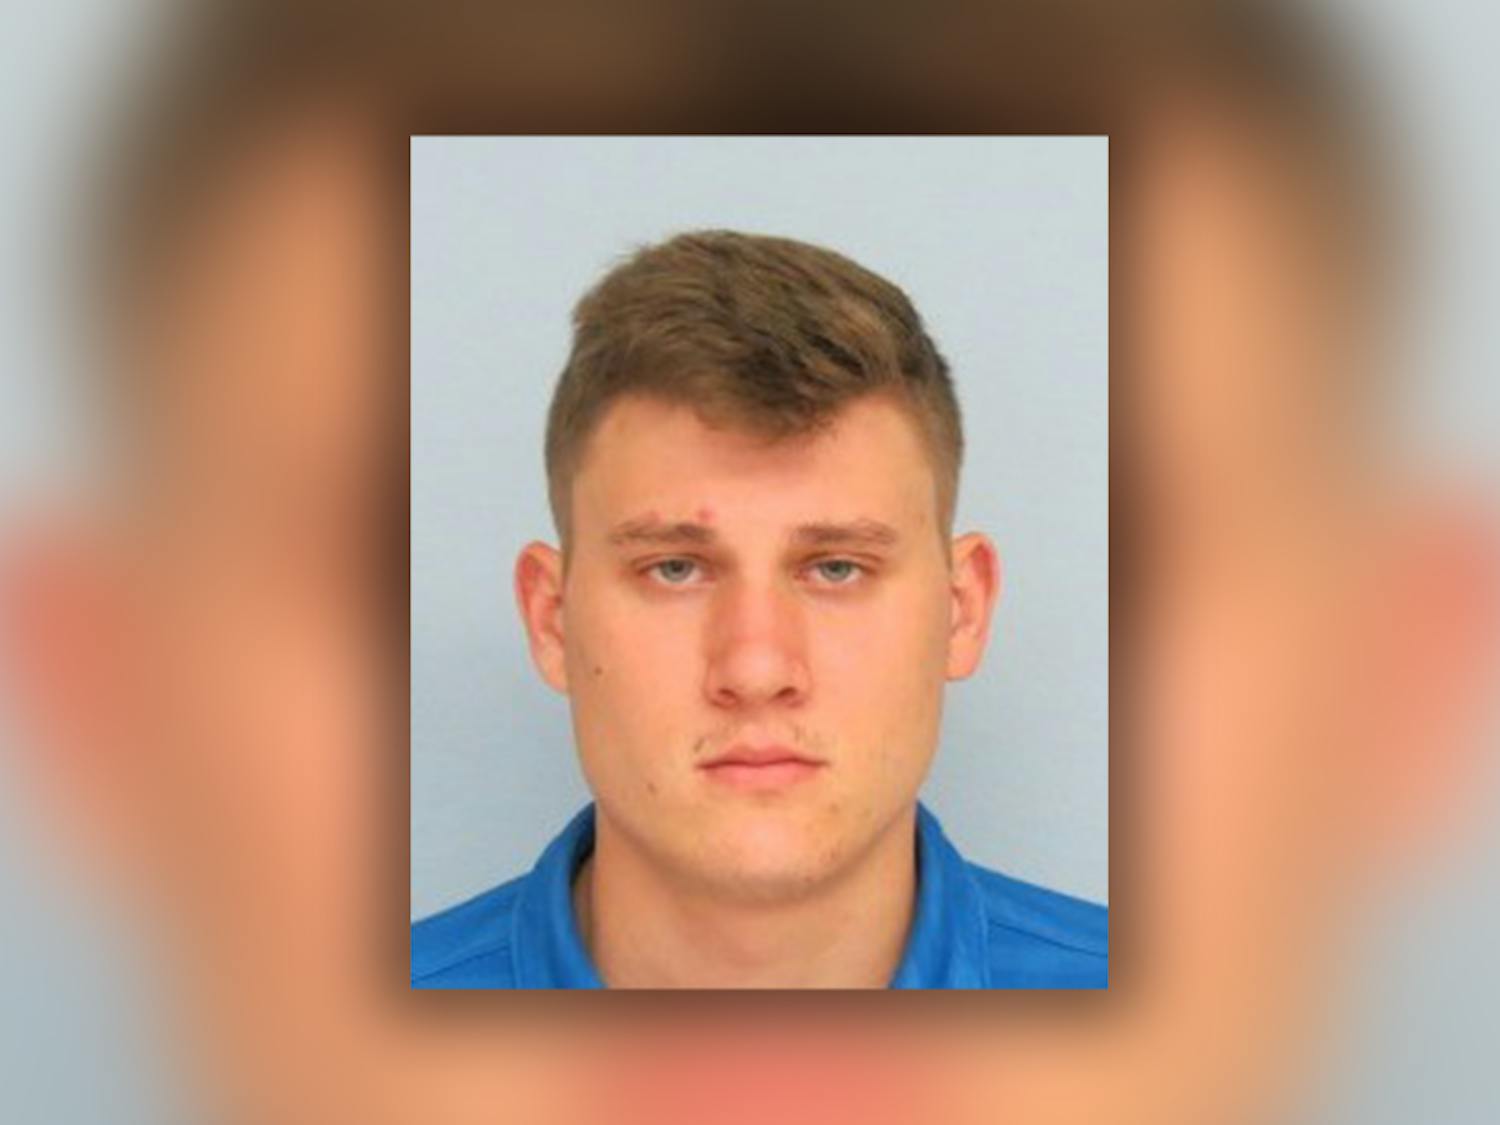 Drew Michael McCormack, a 20-year-old Auburn junior, was arrested Wednesday and charged with first-degree rape and first-degree sodomy, police said.